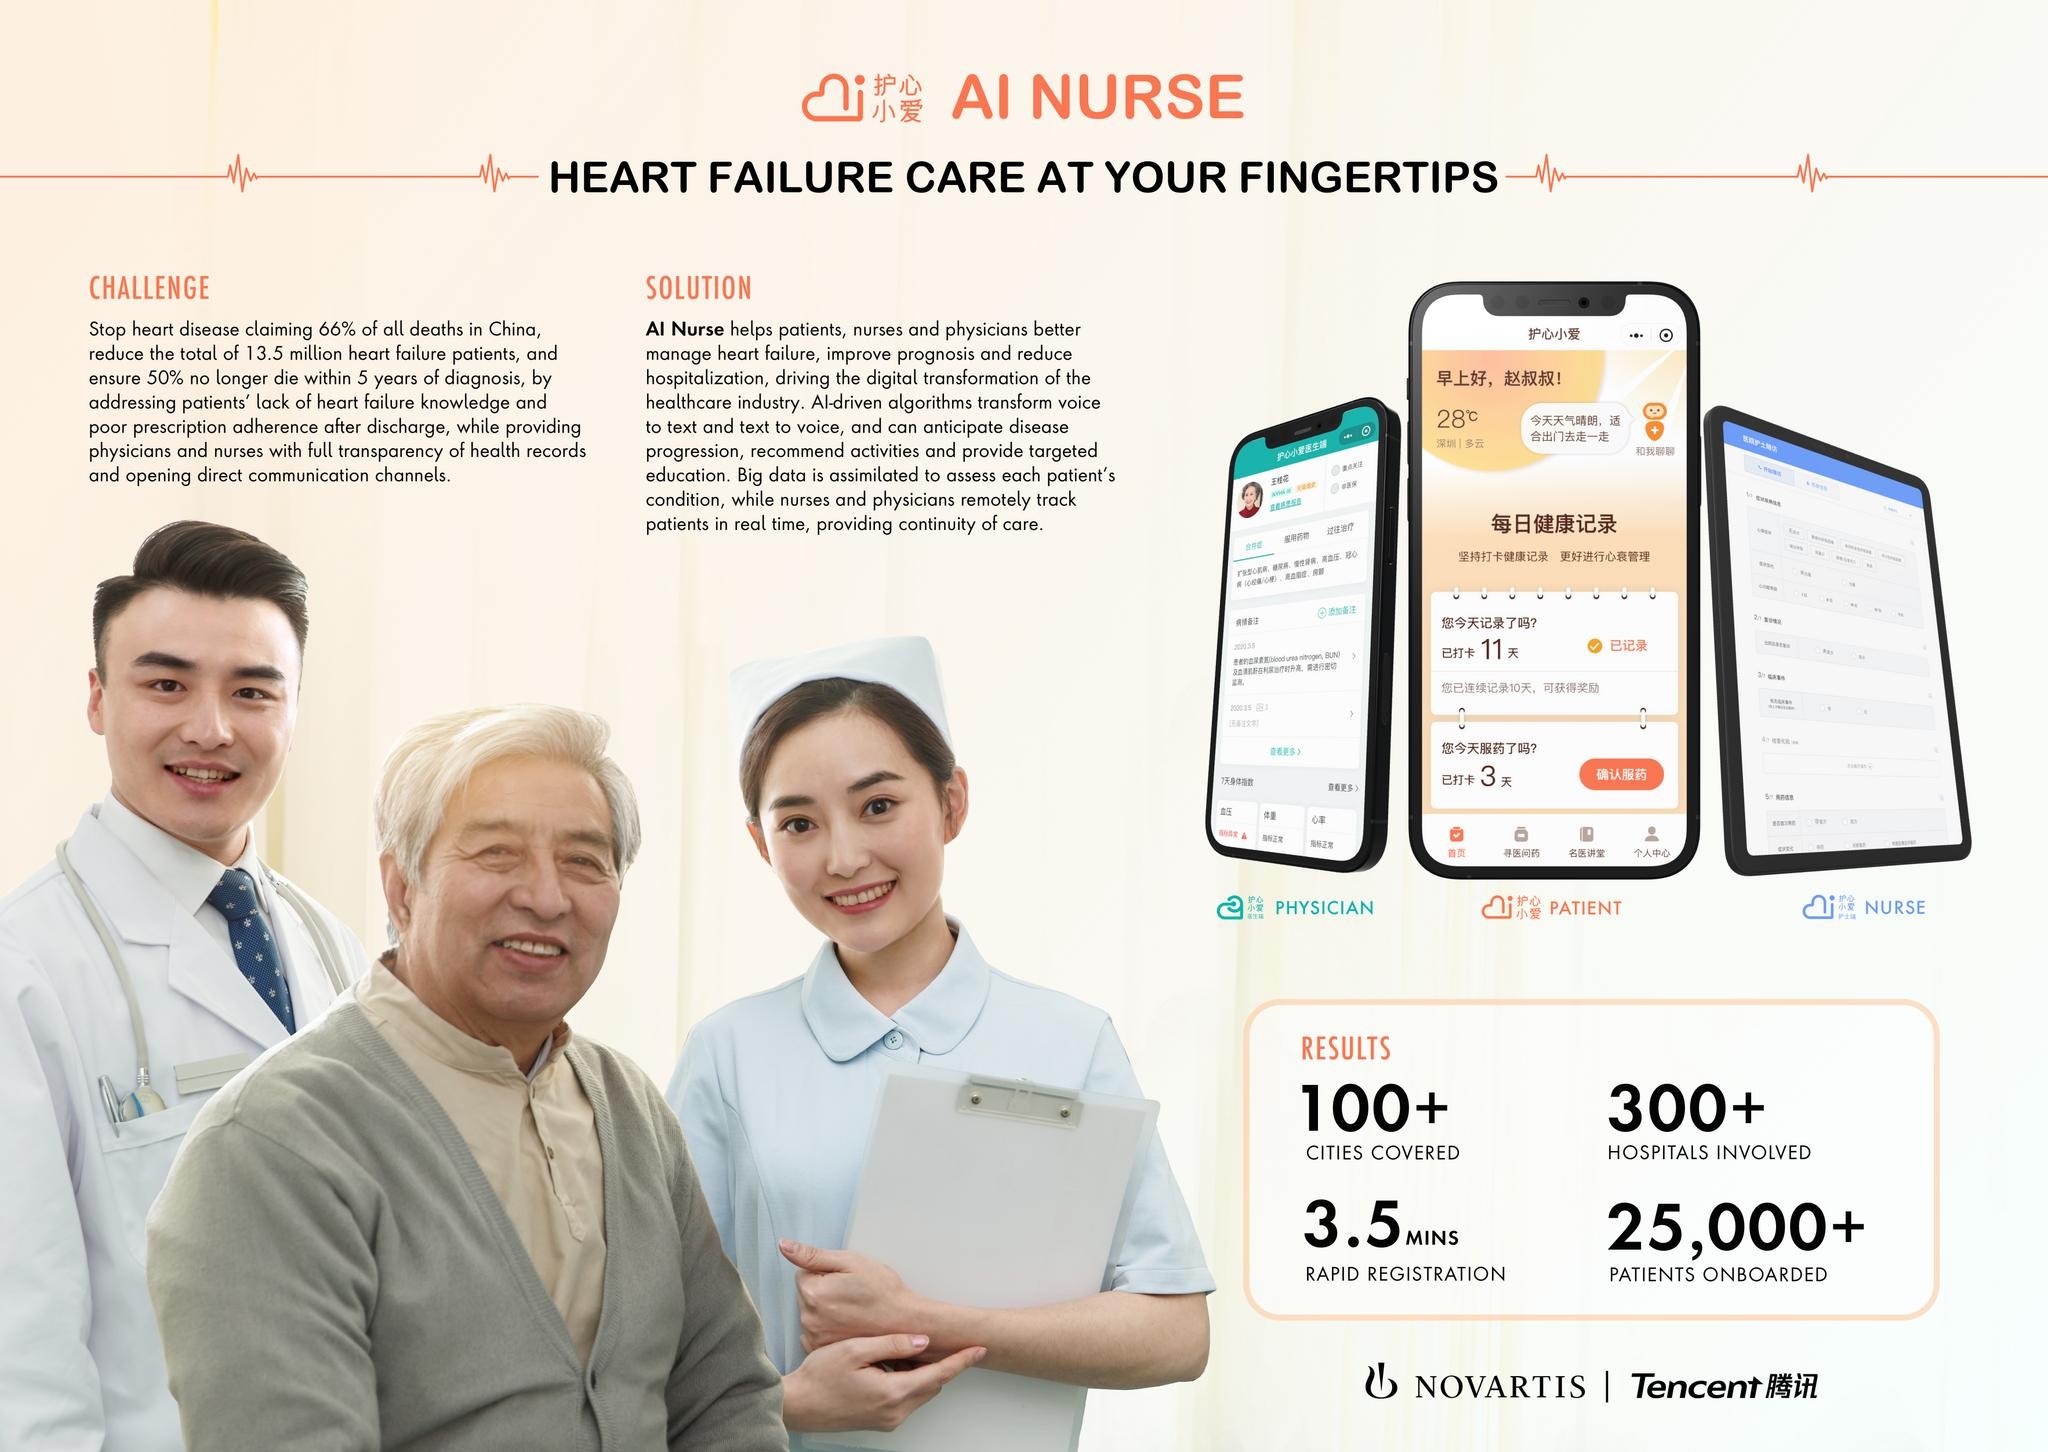 HEART FAILURE CARE AT YOUR FINGERTIPS